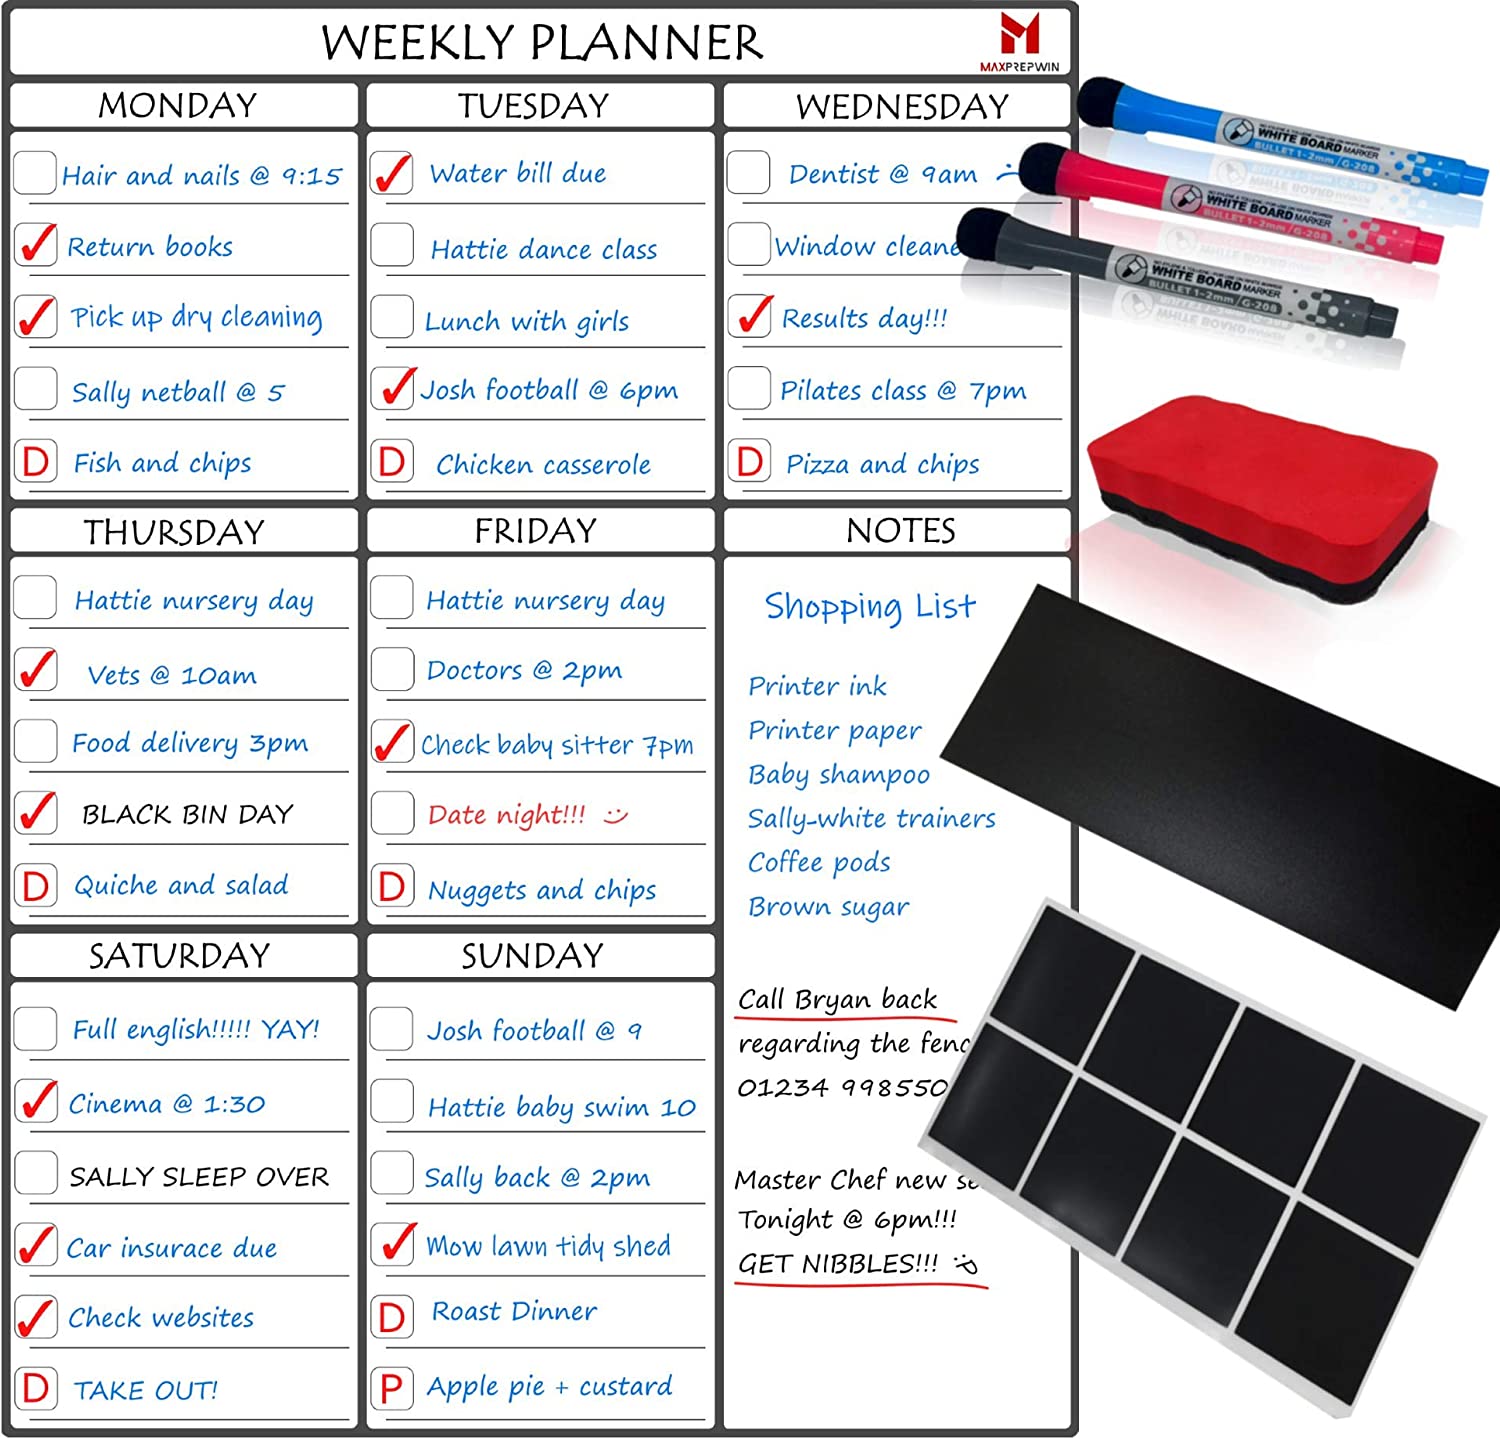 Max Prep Win Magnetic Weekly Planner Whiteboard RRP £13.89 CLEARANCE XL £9.99